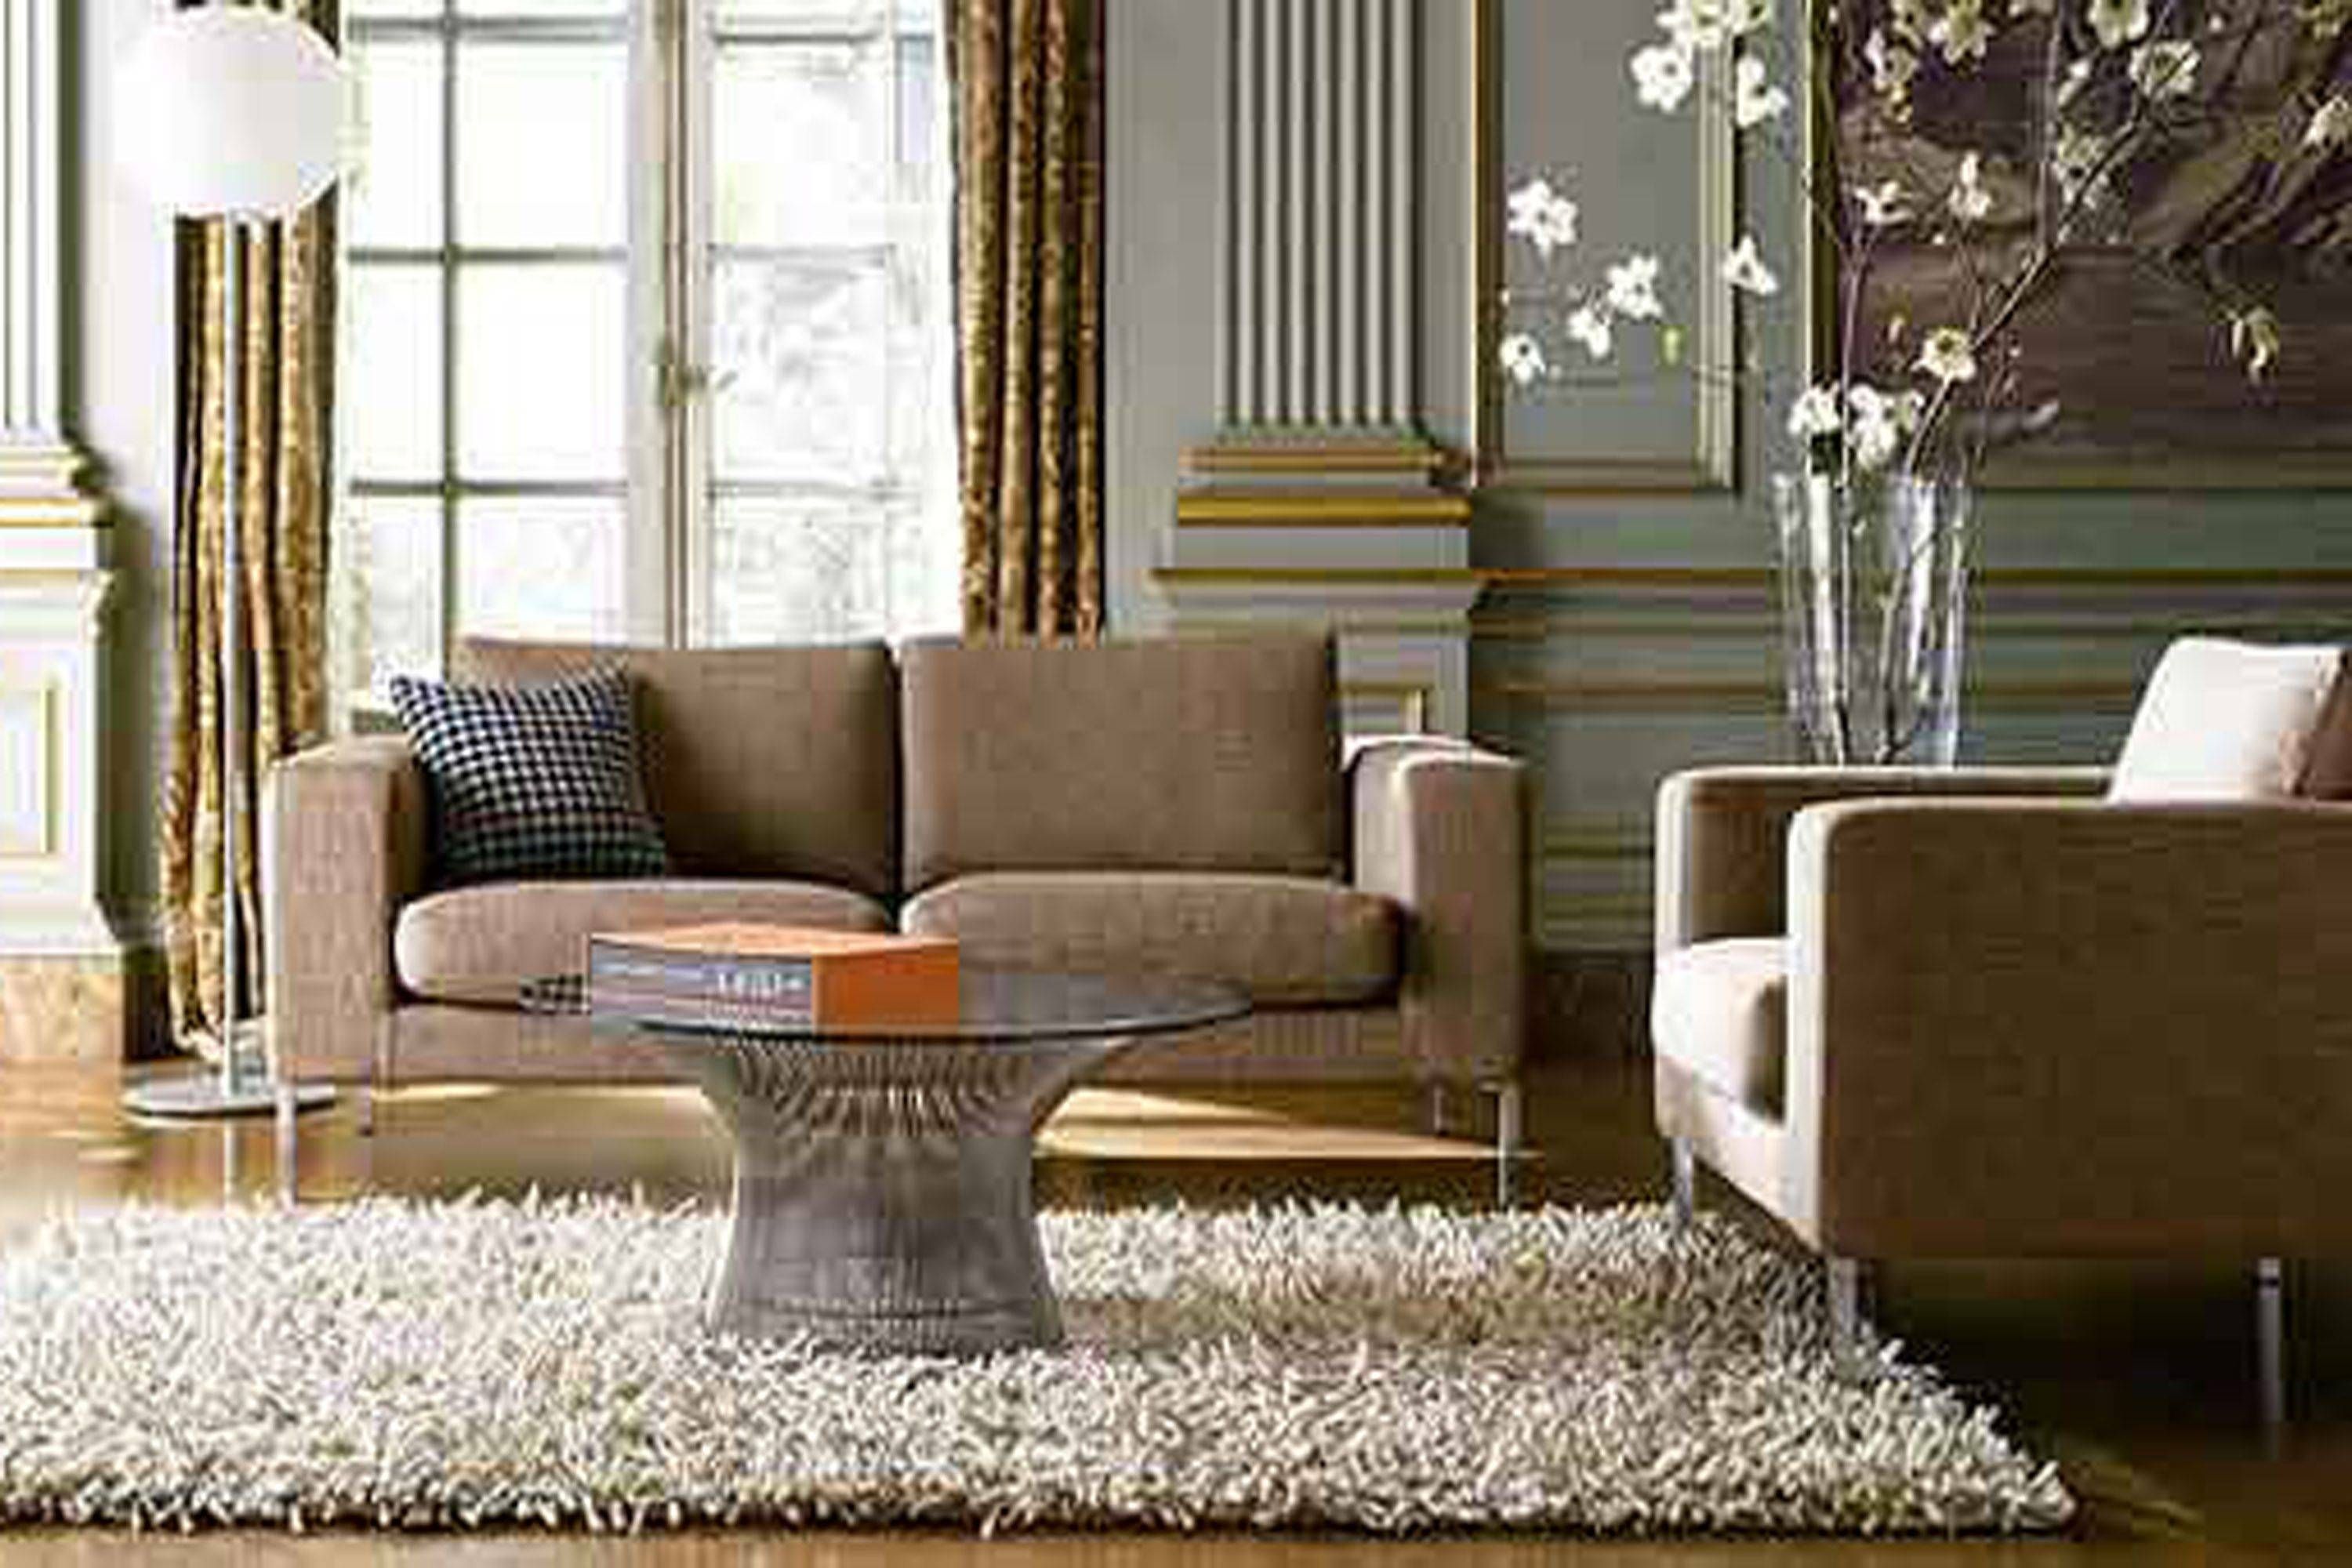 Brown Sofa Sets Look Nice In Living Room With White Flower Decor Within Brown Sofa Decors (View 9 of 15)